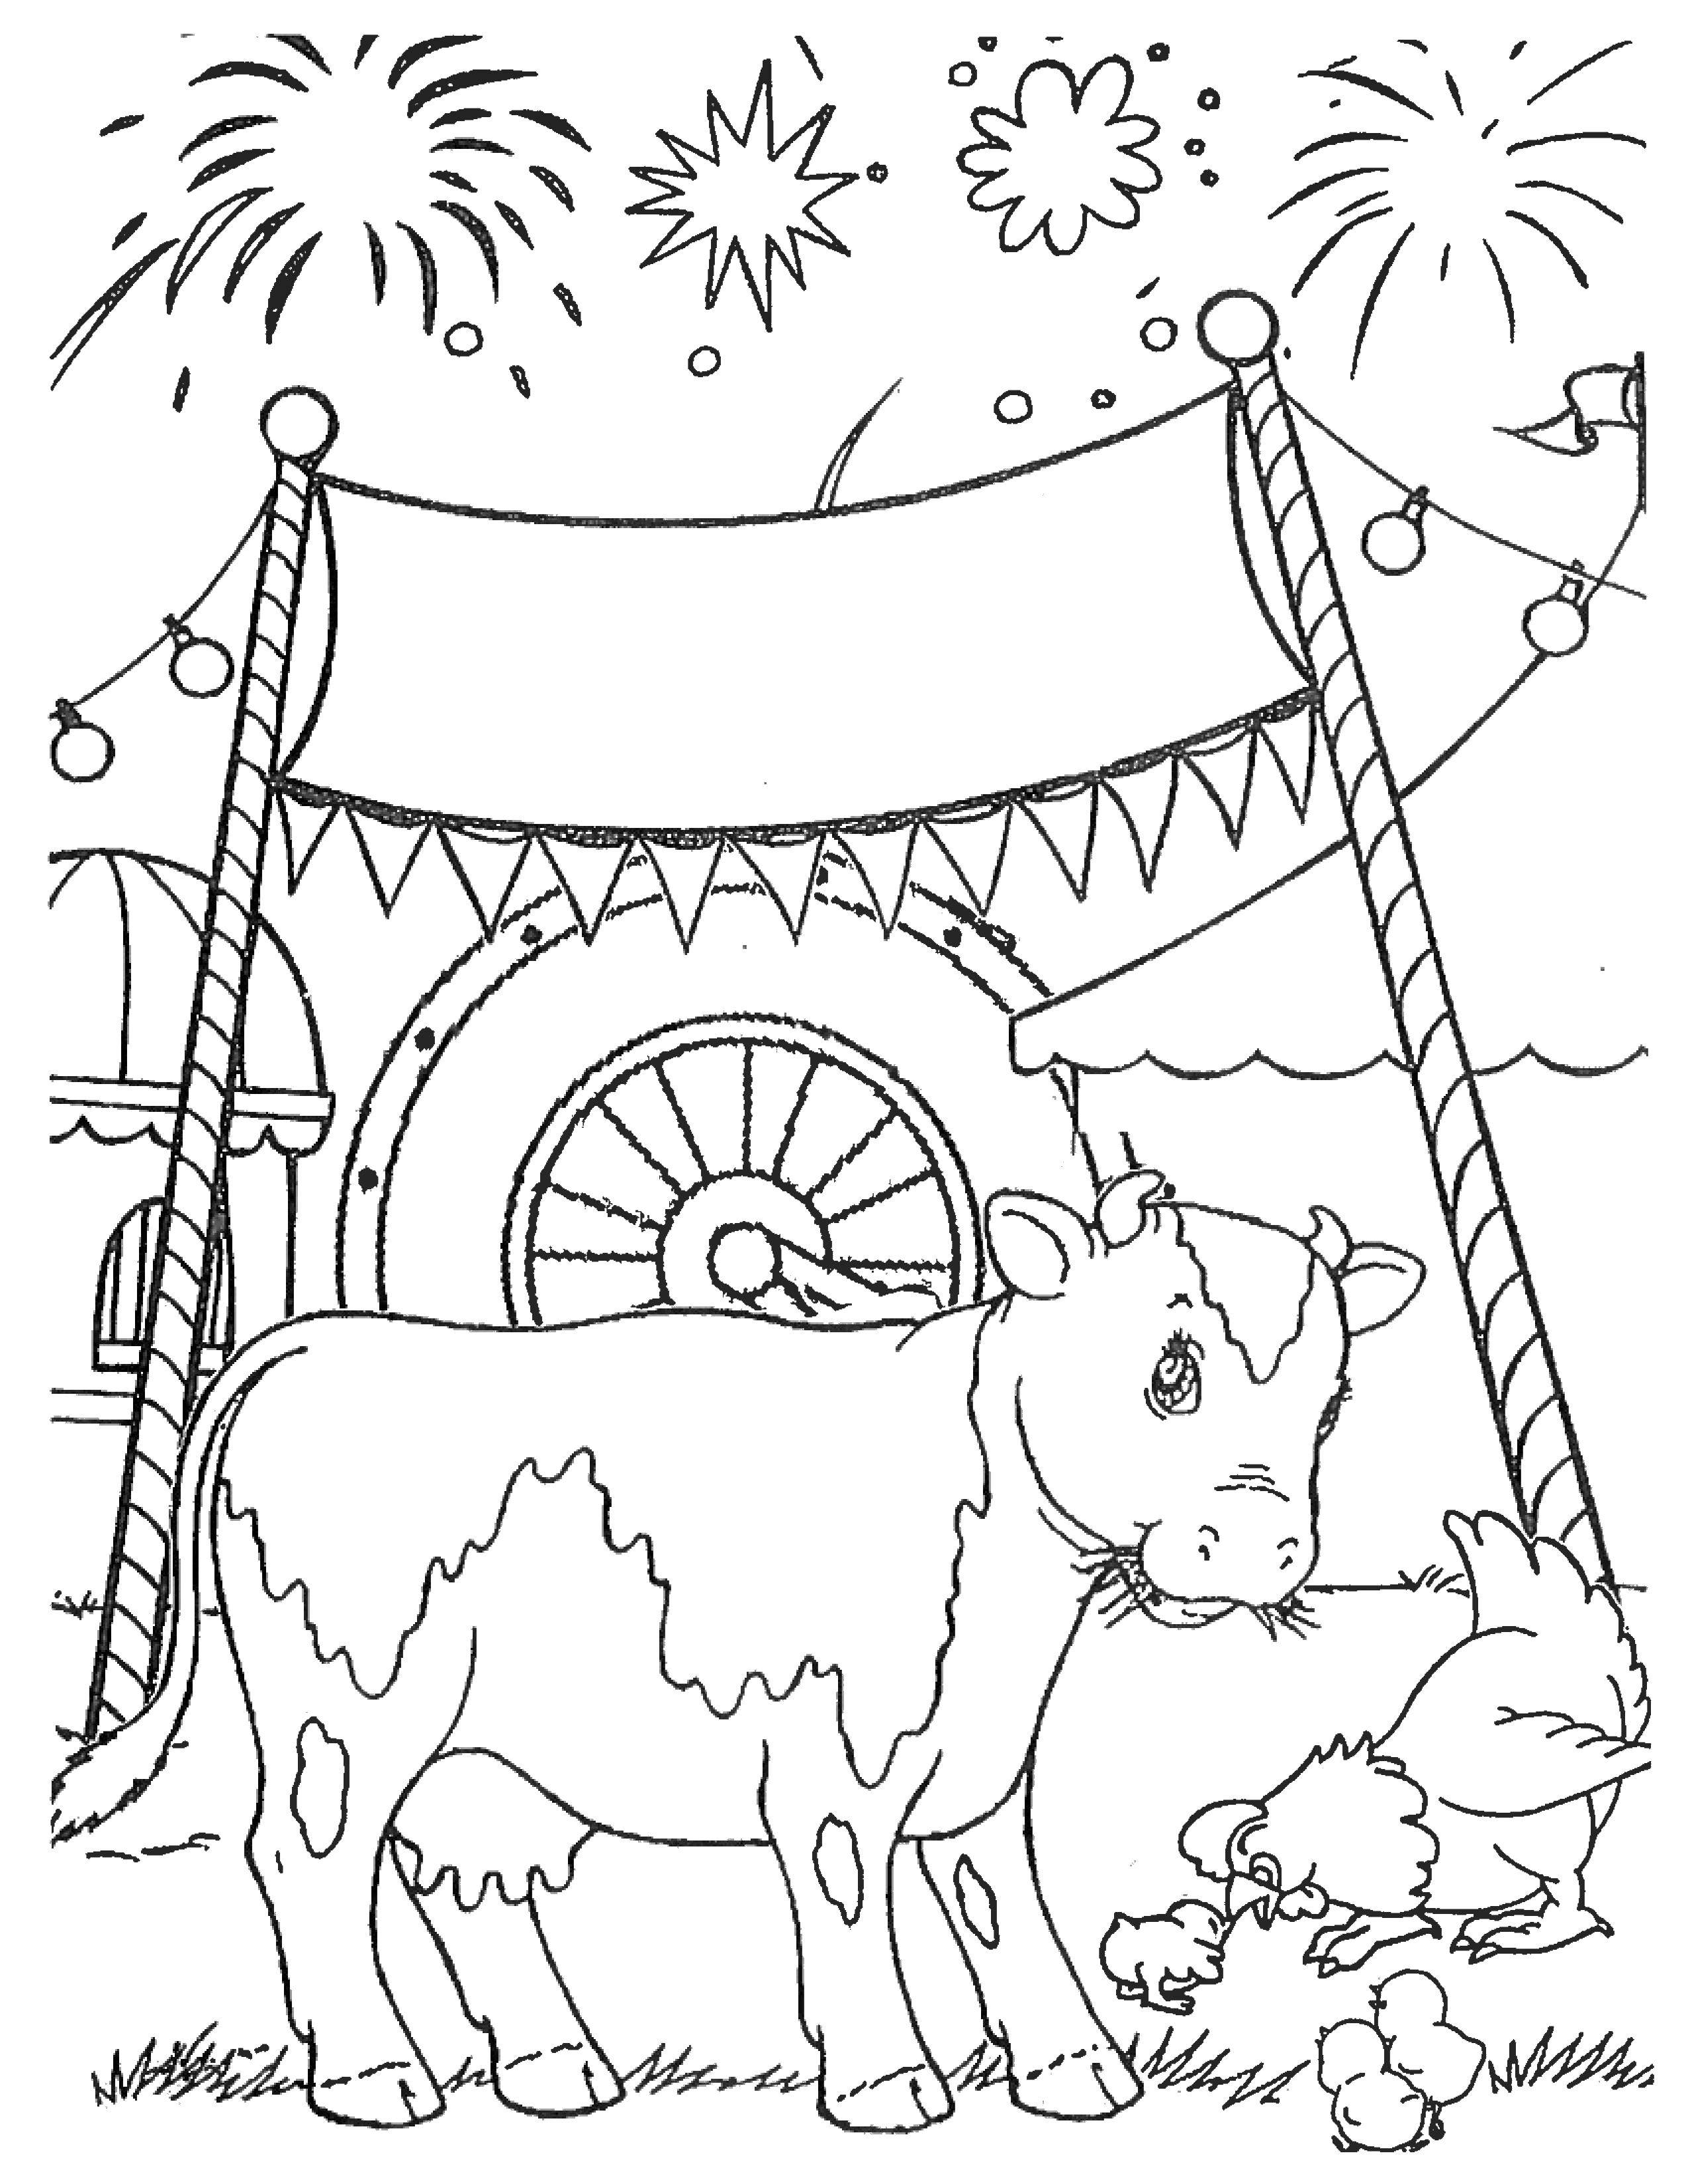 Coloring Cattle and fireworks. Category Pets allowed. Tags:  animals, fireworks.